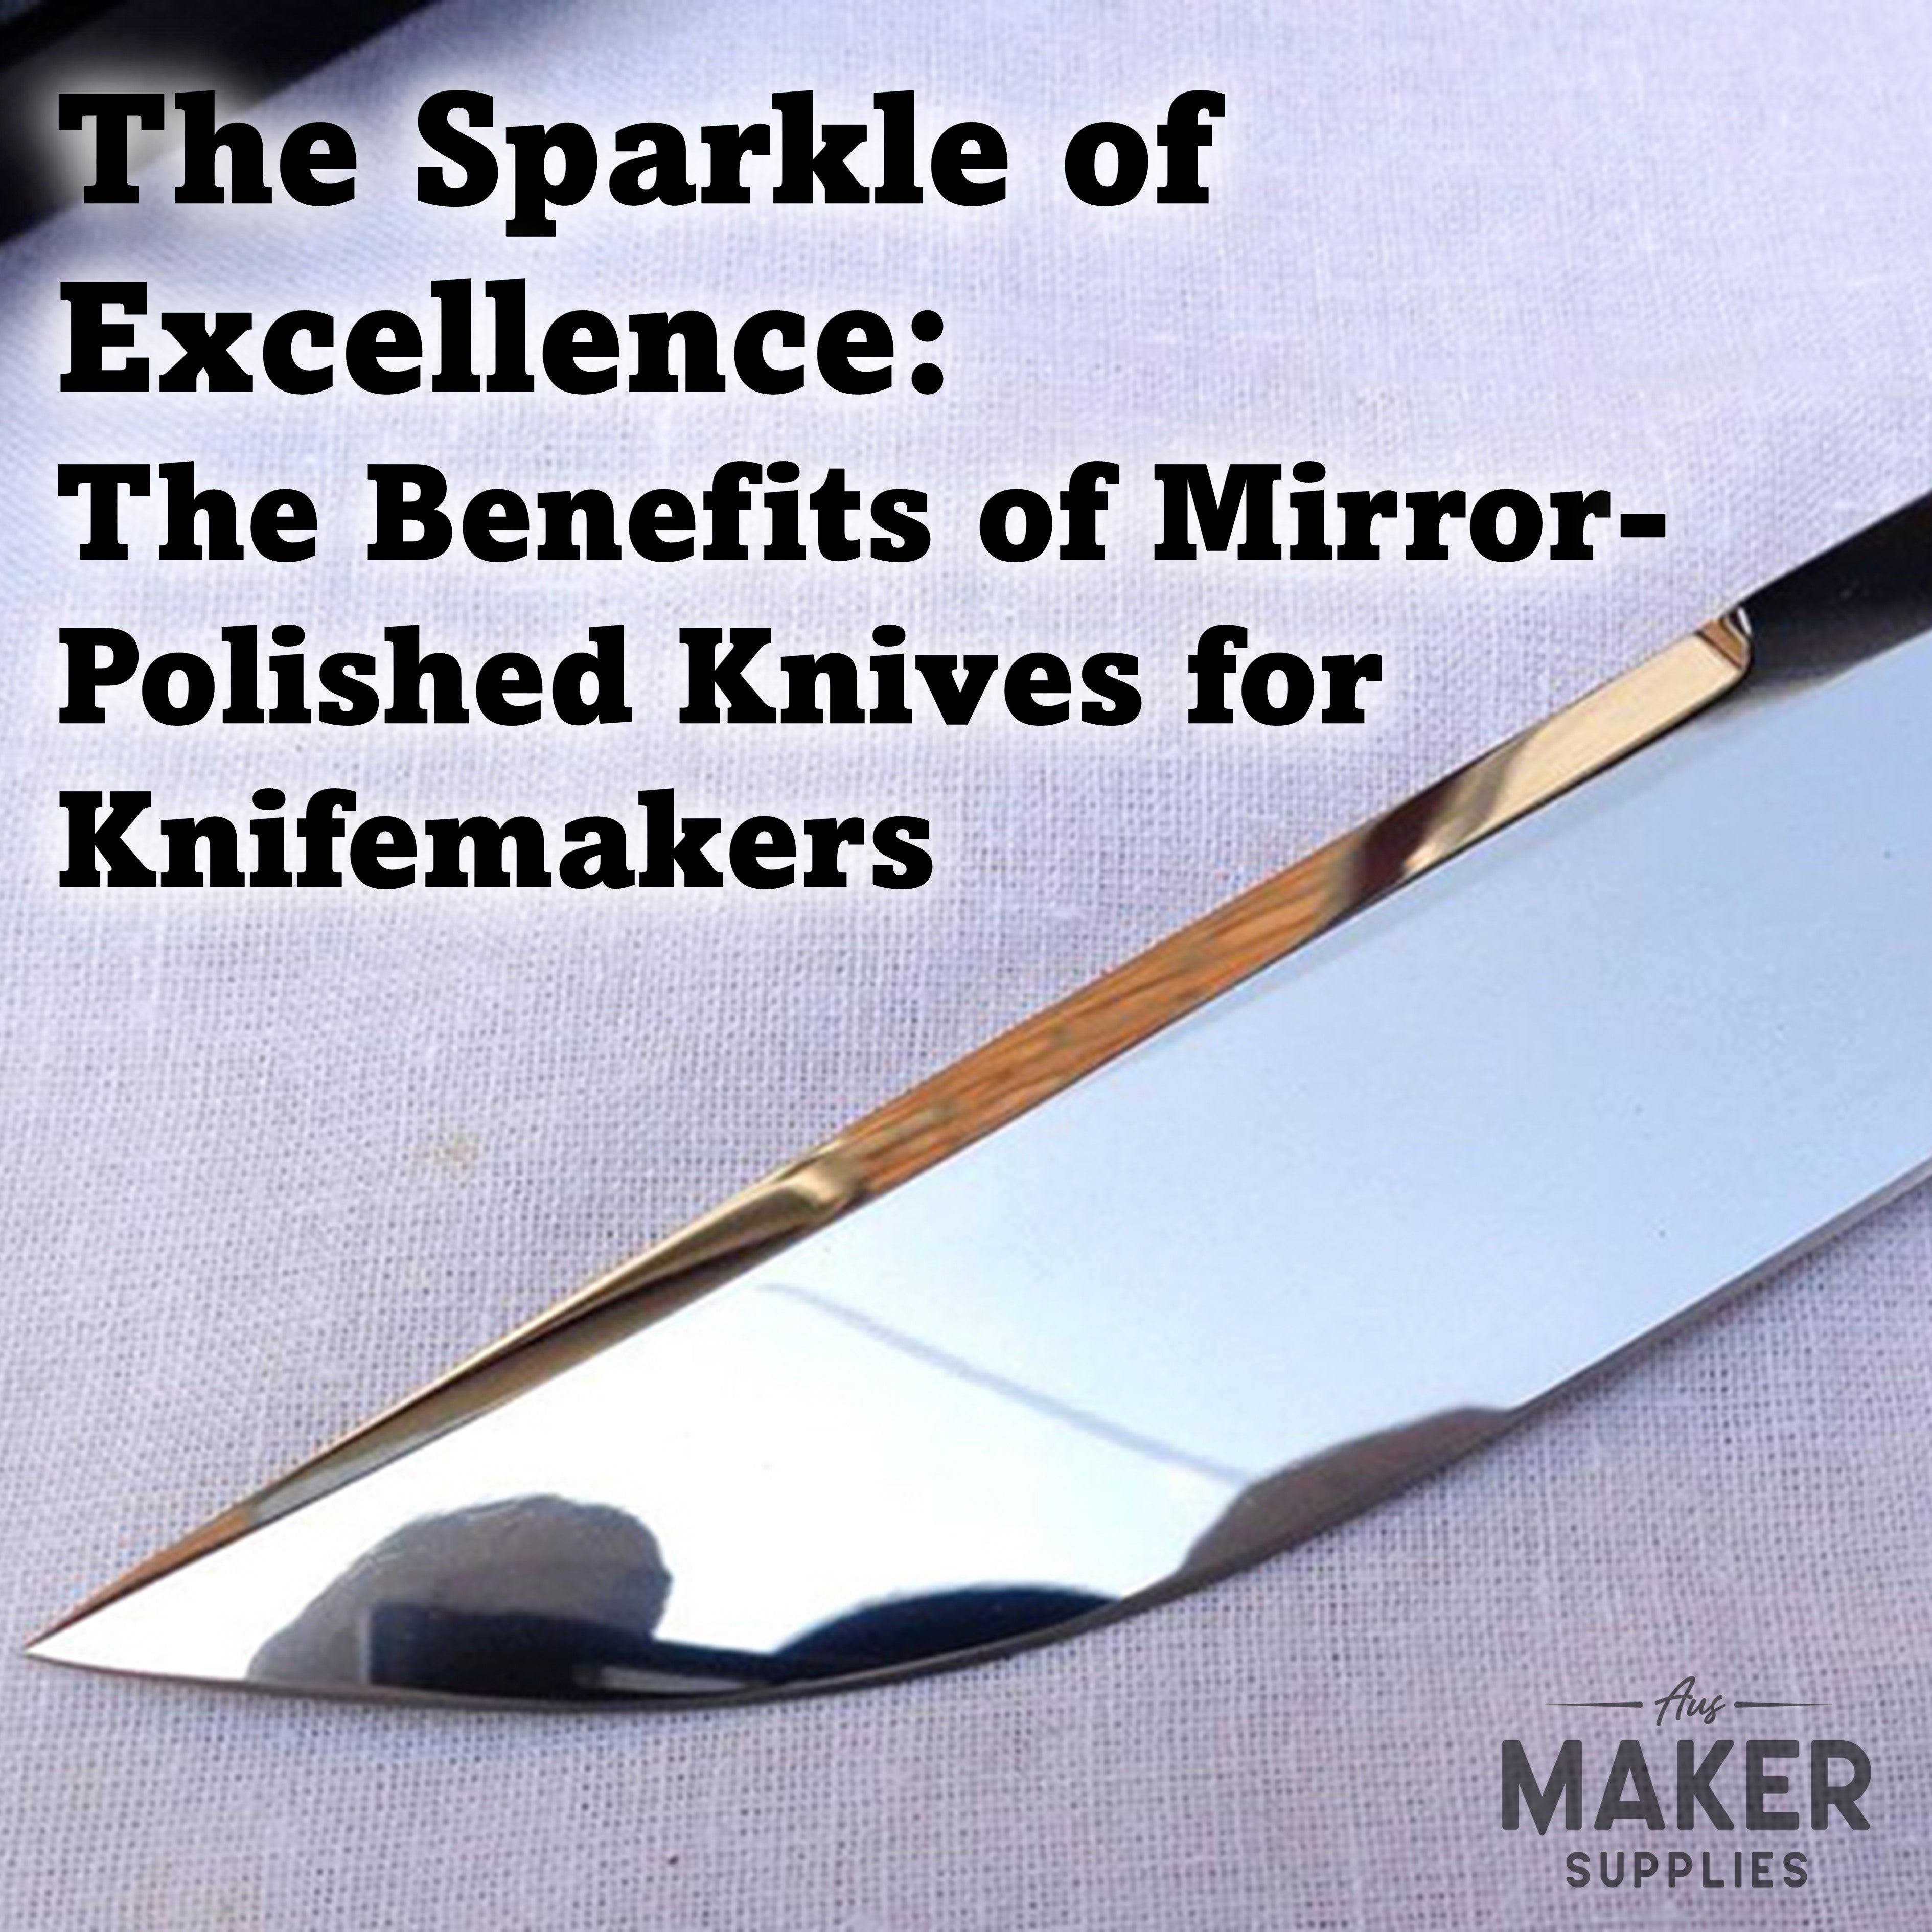 The Sparkle of Excellence: The Benefits of Mirror-Polished Knives for Knifemakers